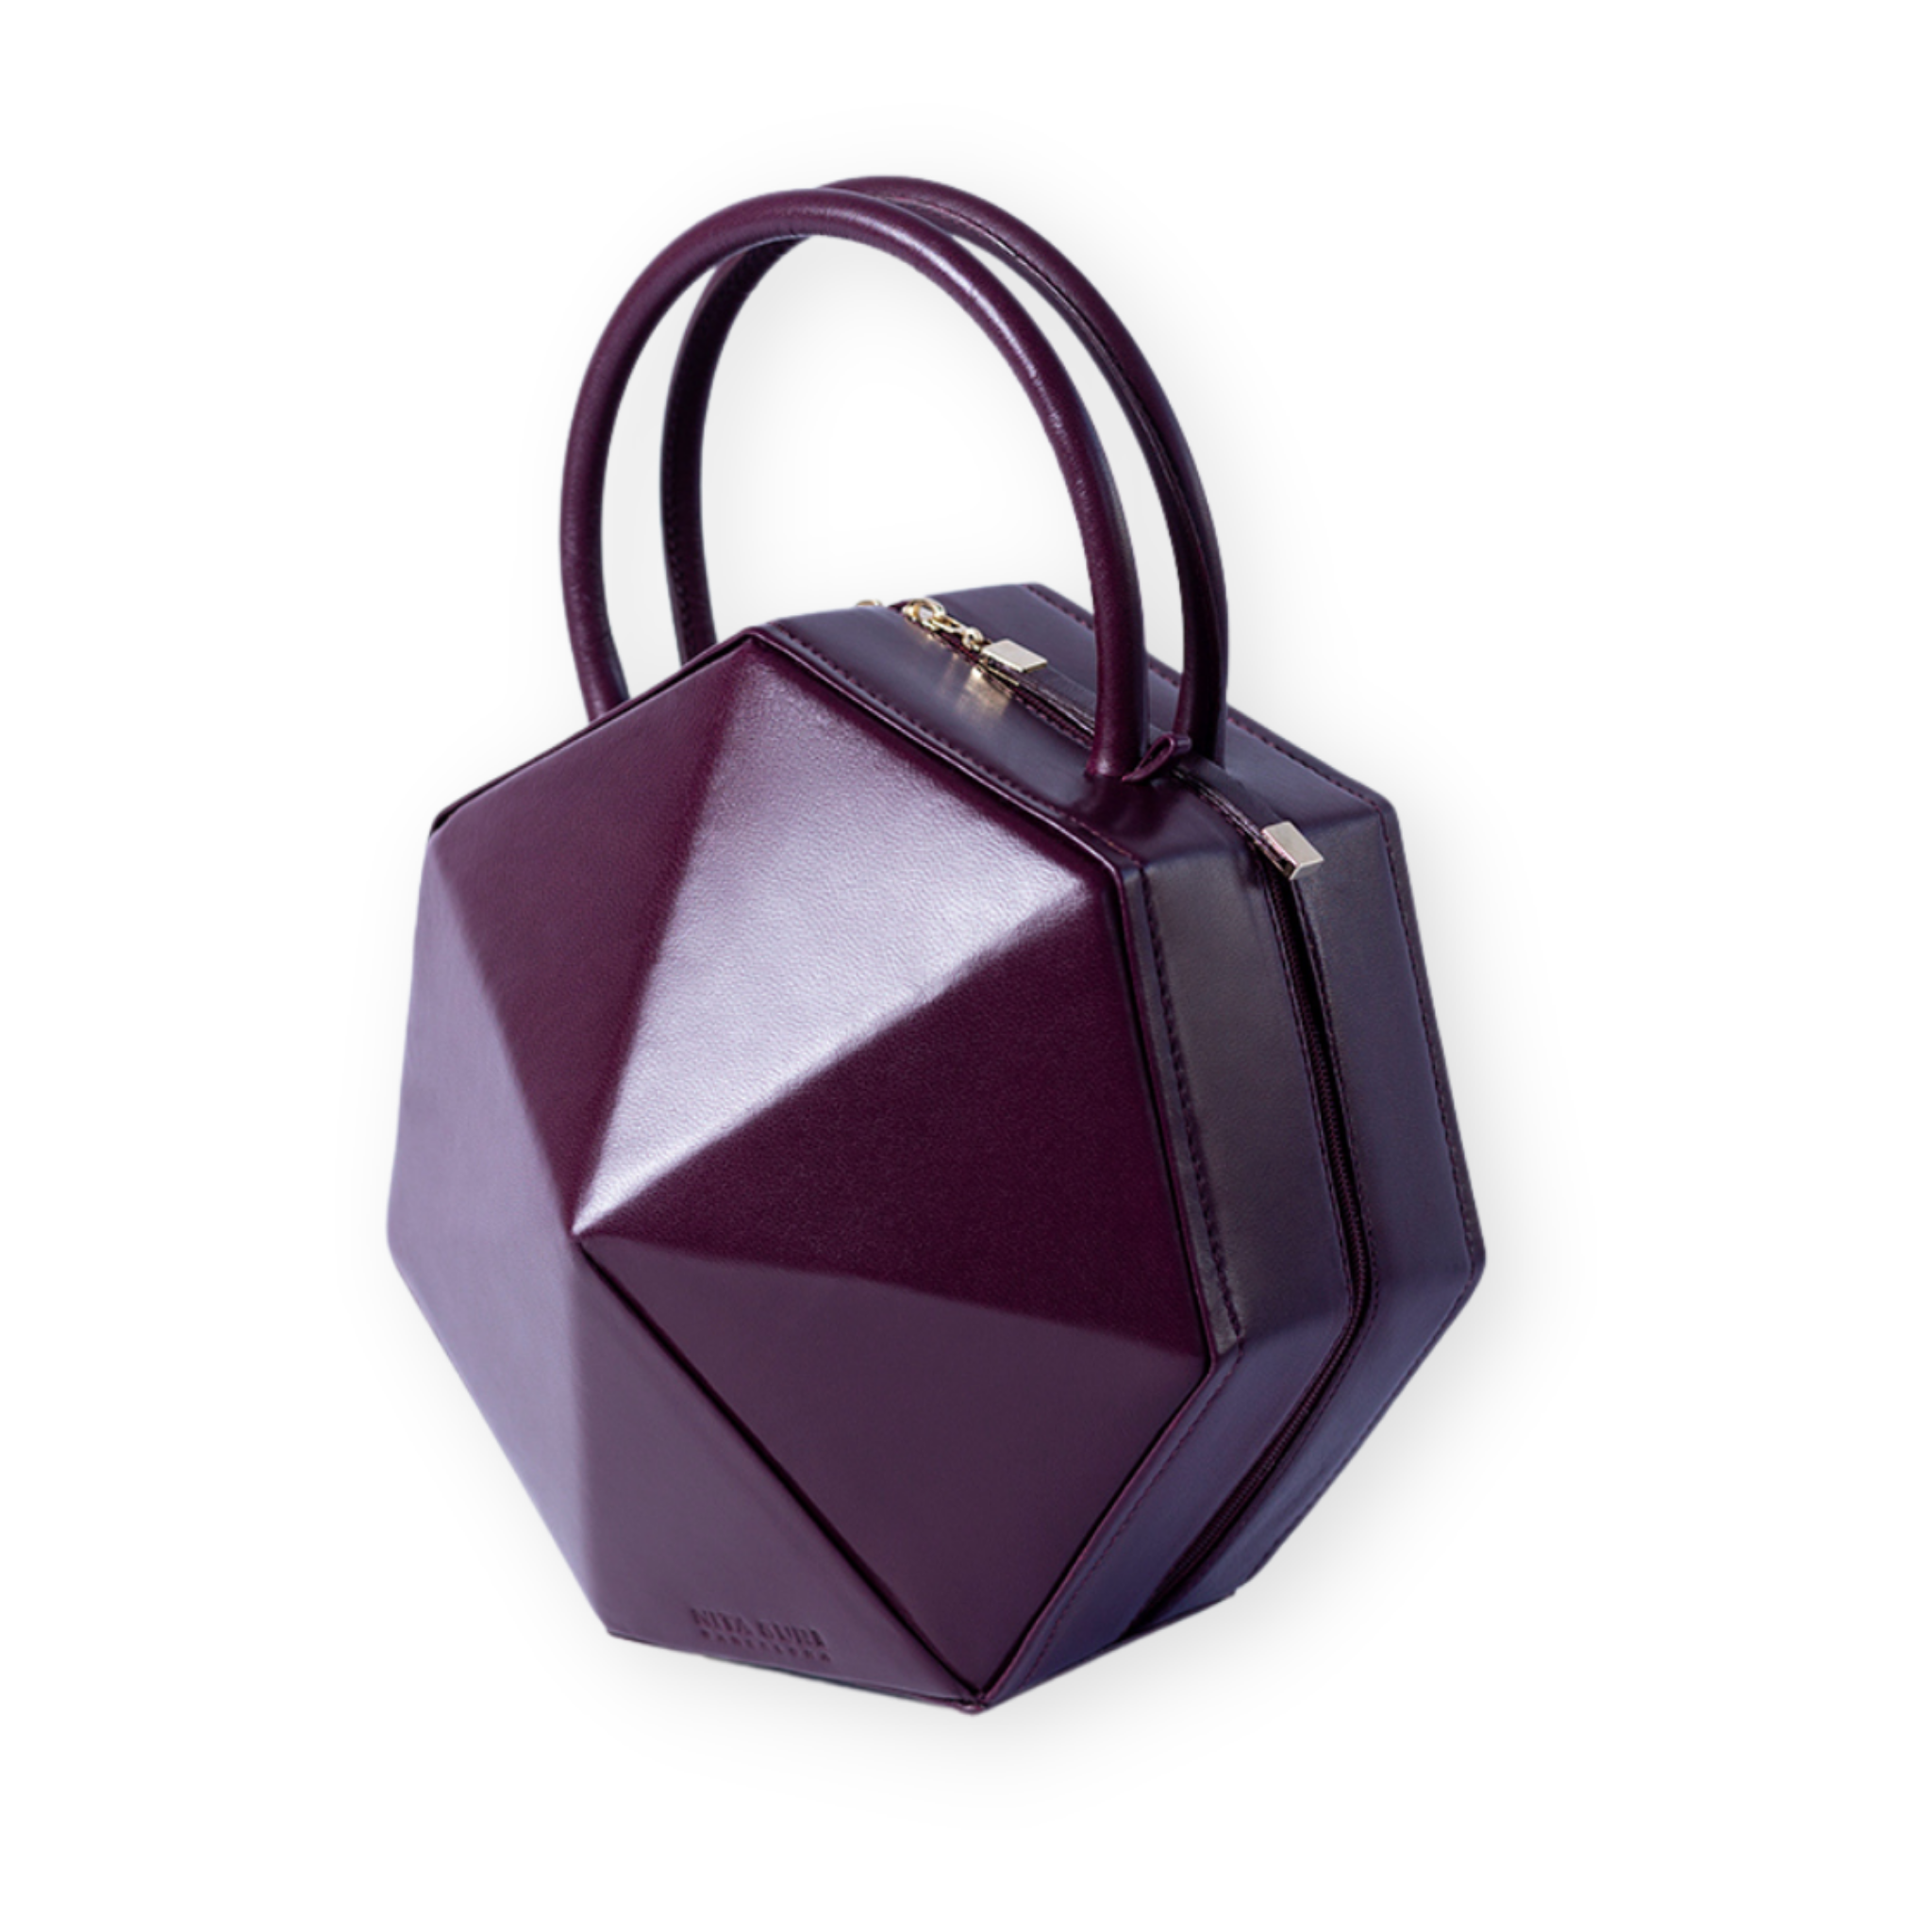 Convertible Executive Leather Bag MIDI in Burgundy | Silver & Riley